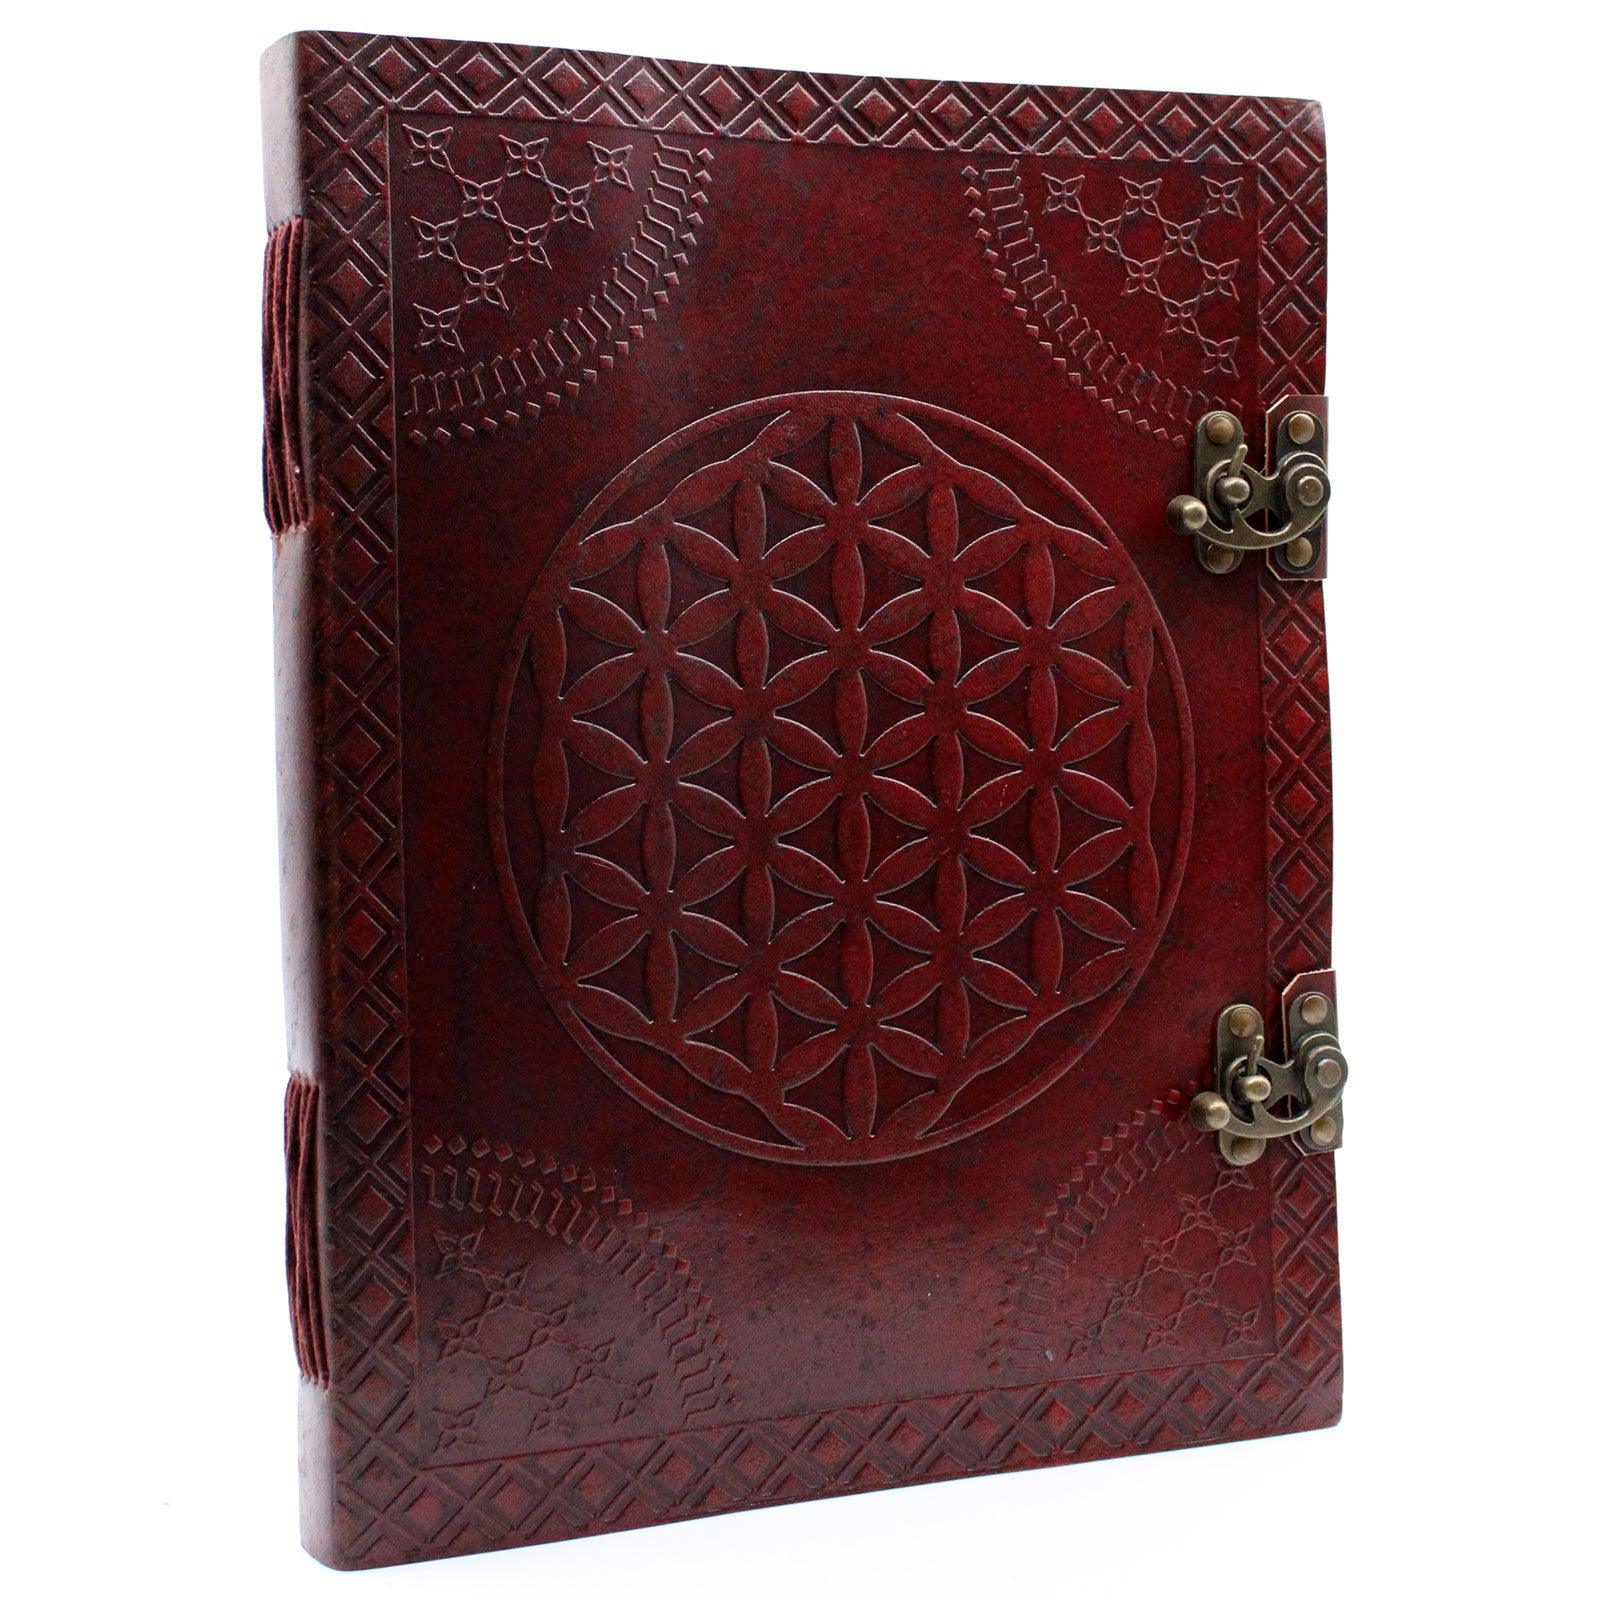 Huge Flower of Life Leather Book 10x13 (200 pages)